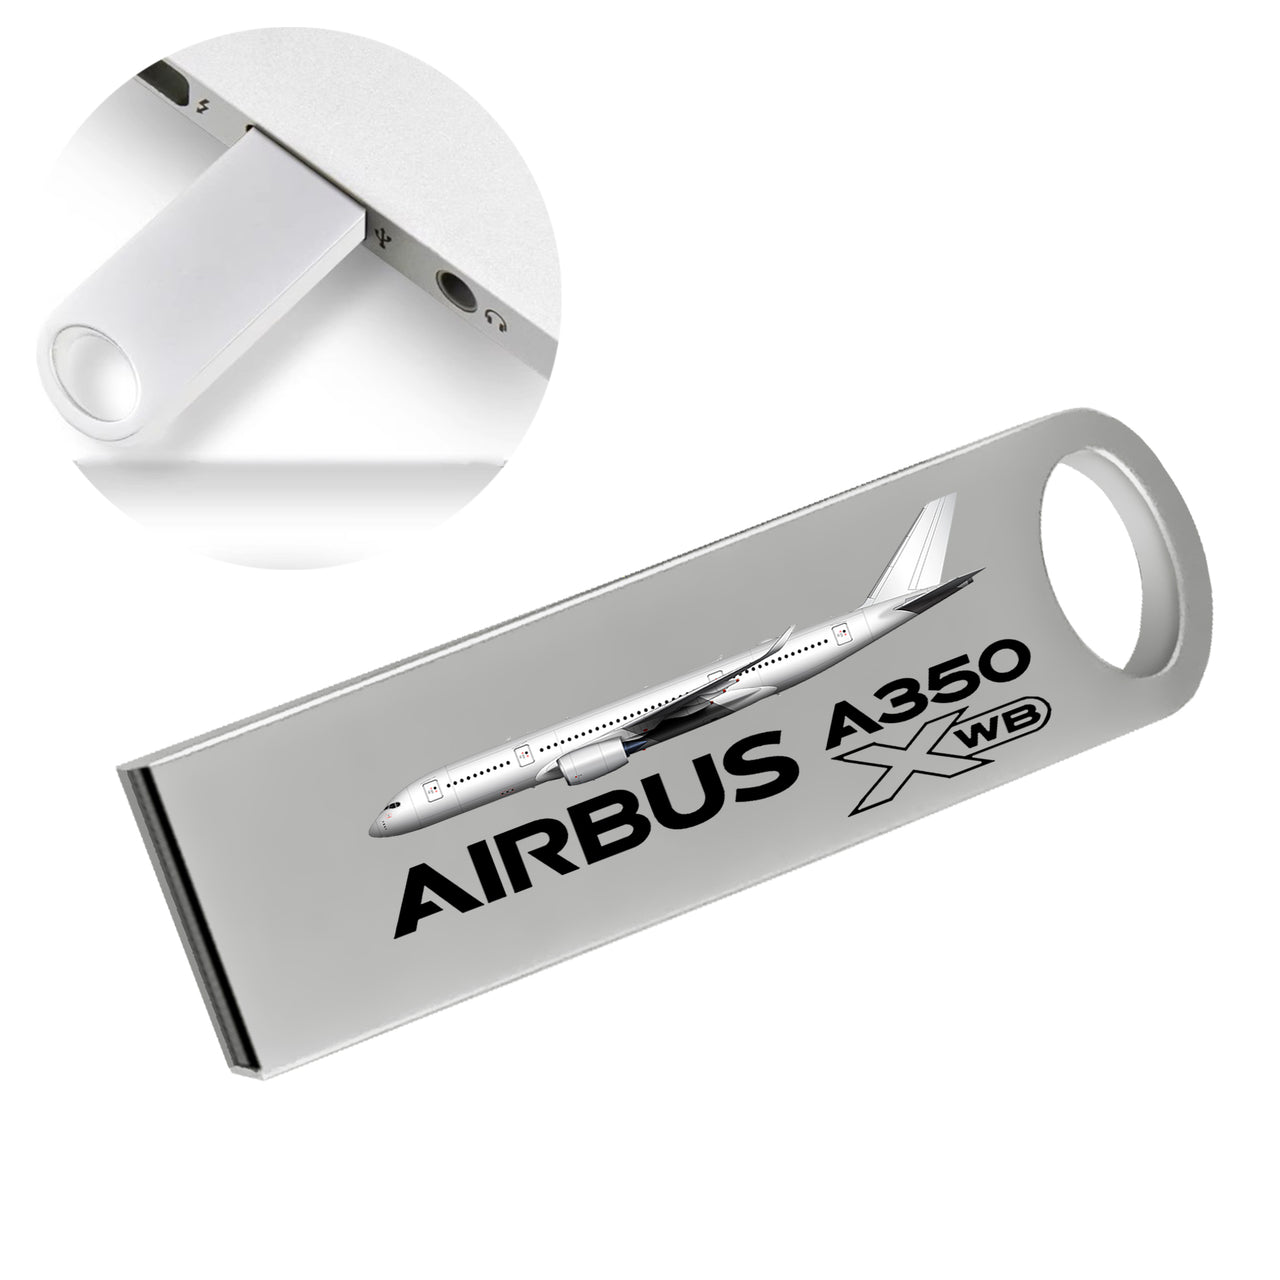 The Airbus A350 WXB Designed Waterproof USB Devices